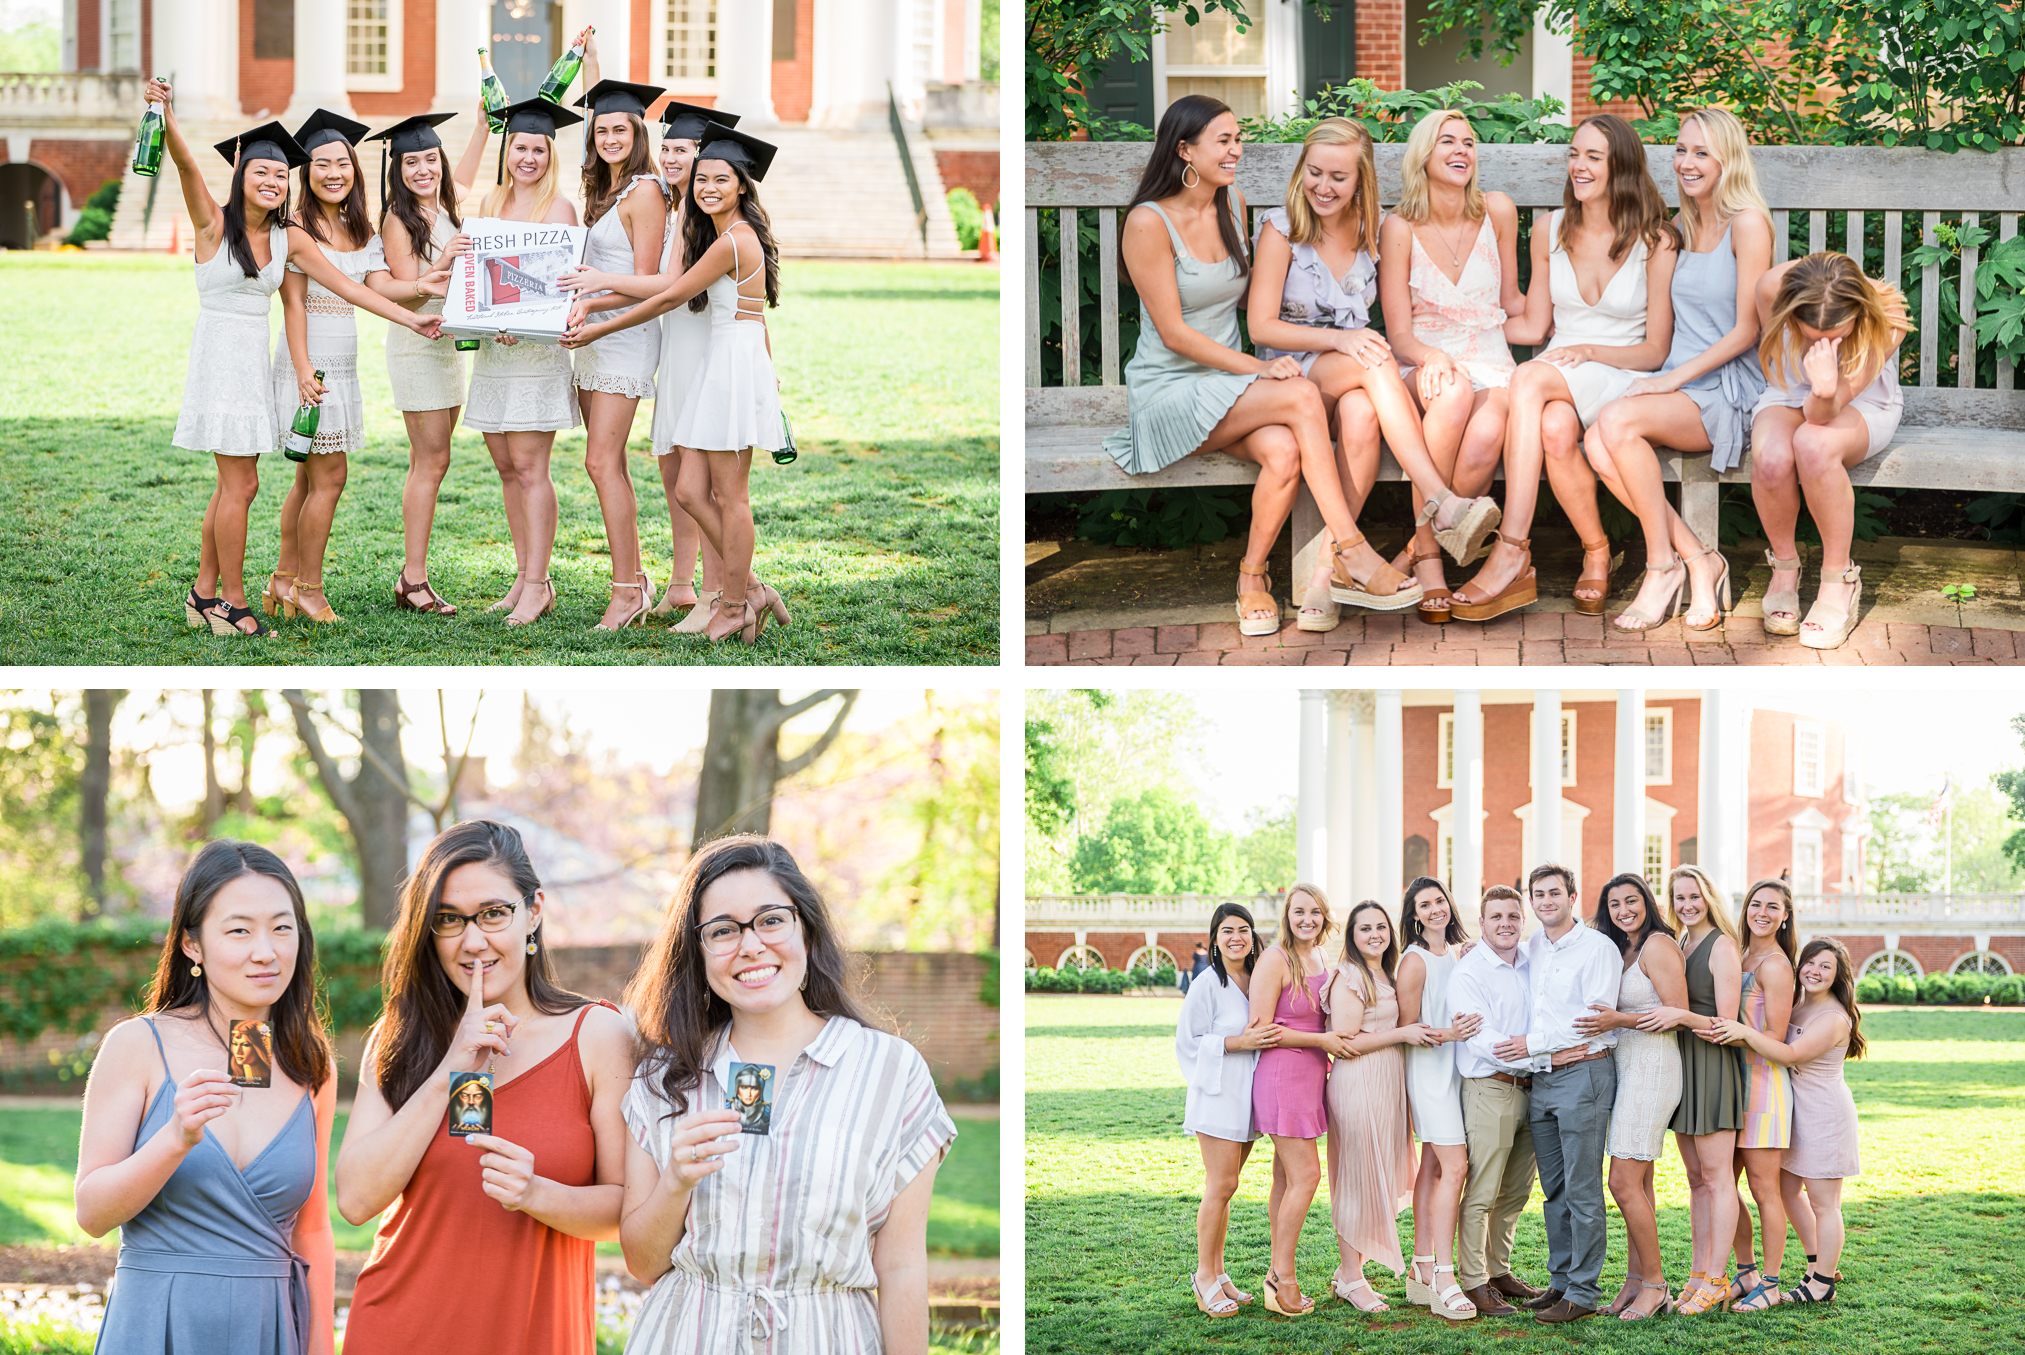 groups of girls pose during their UVA graduation photoshoots - with pizza, laughing, with board games or with friends